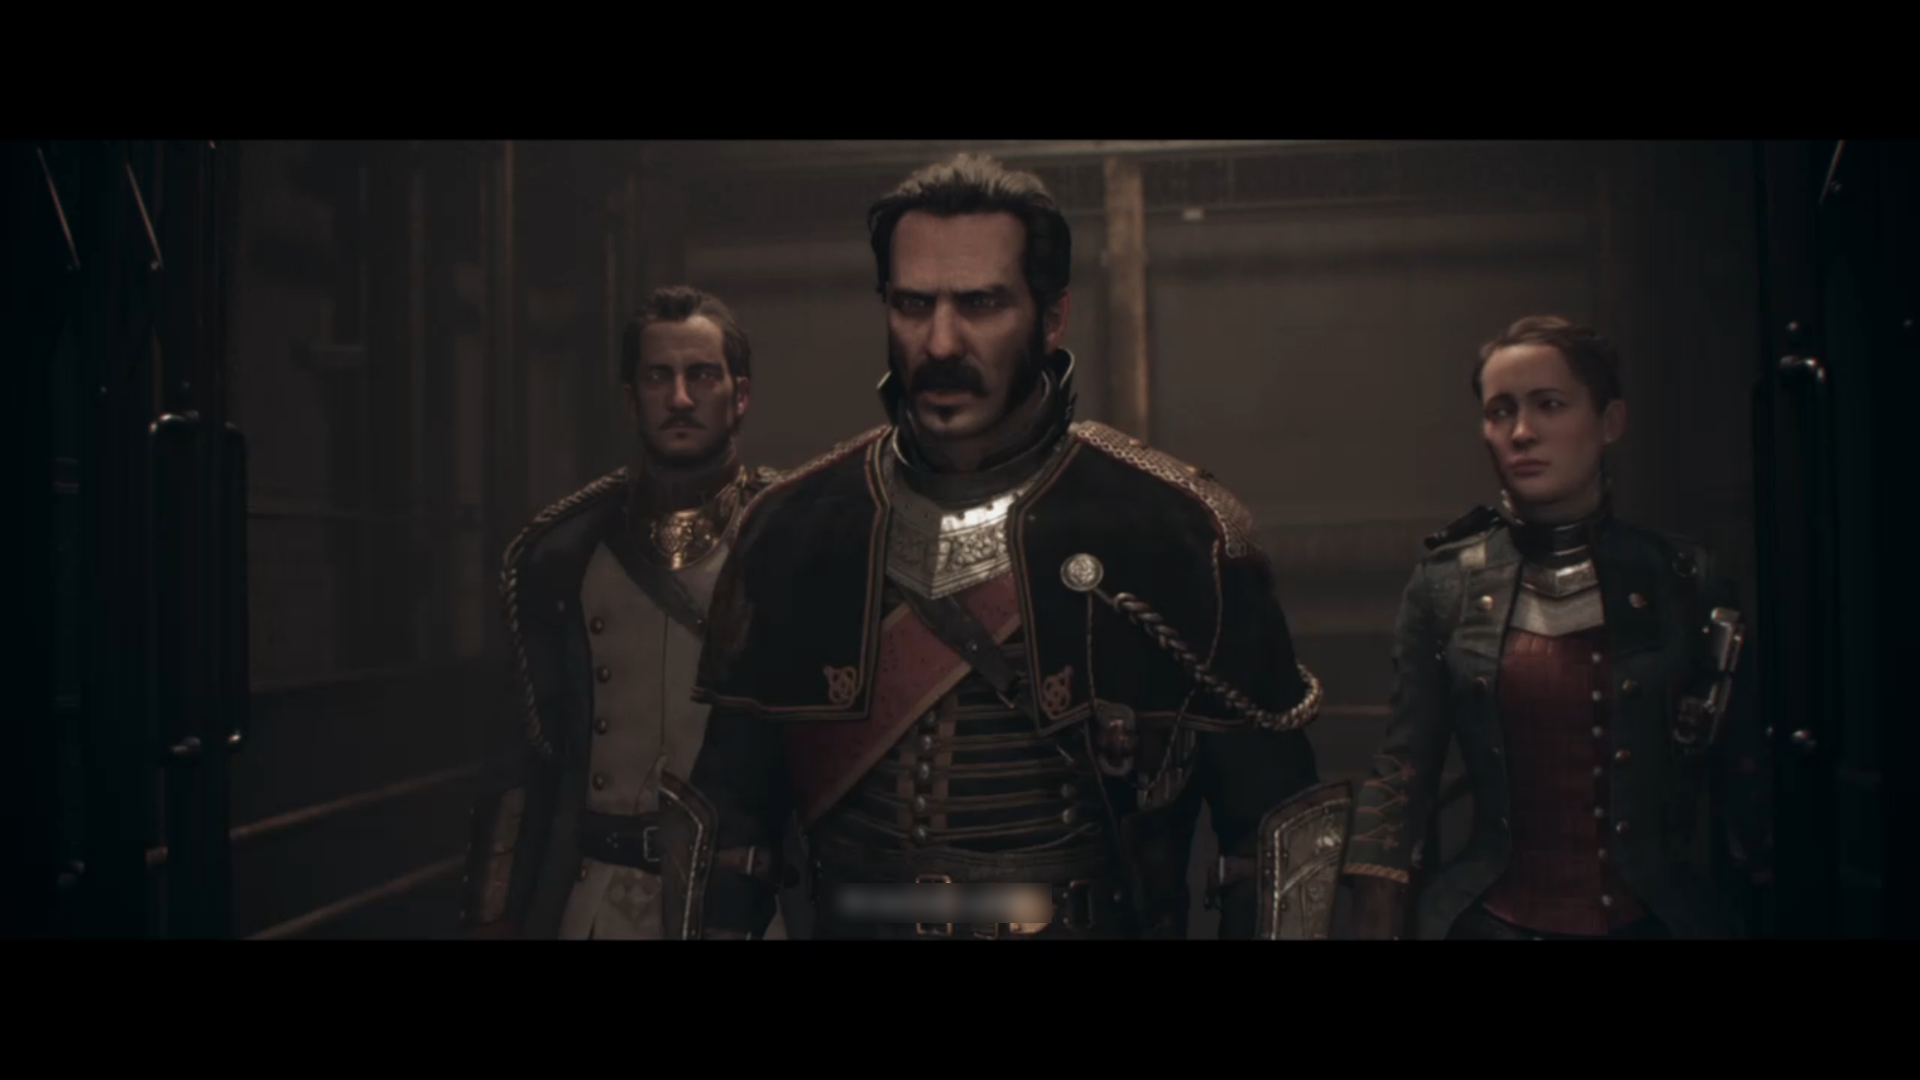 Ps4 1886. The order: 1886. The order 1886 геймплей. Сэр Галахад order 1886. The order 1886 Галахад.